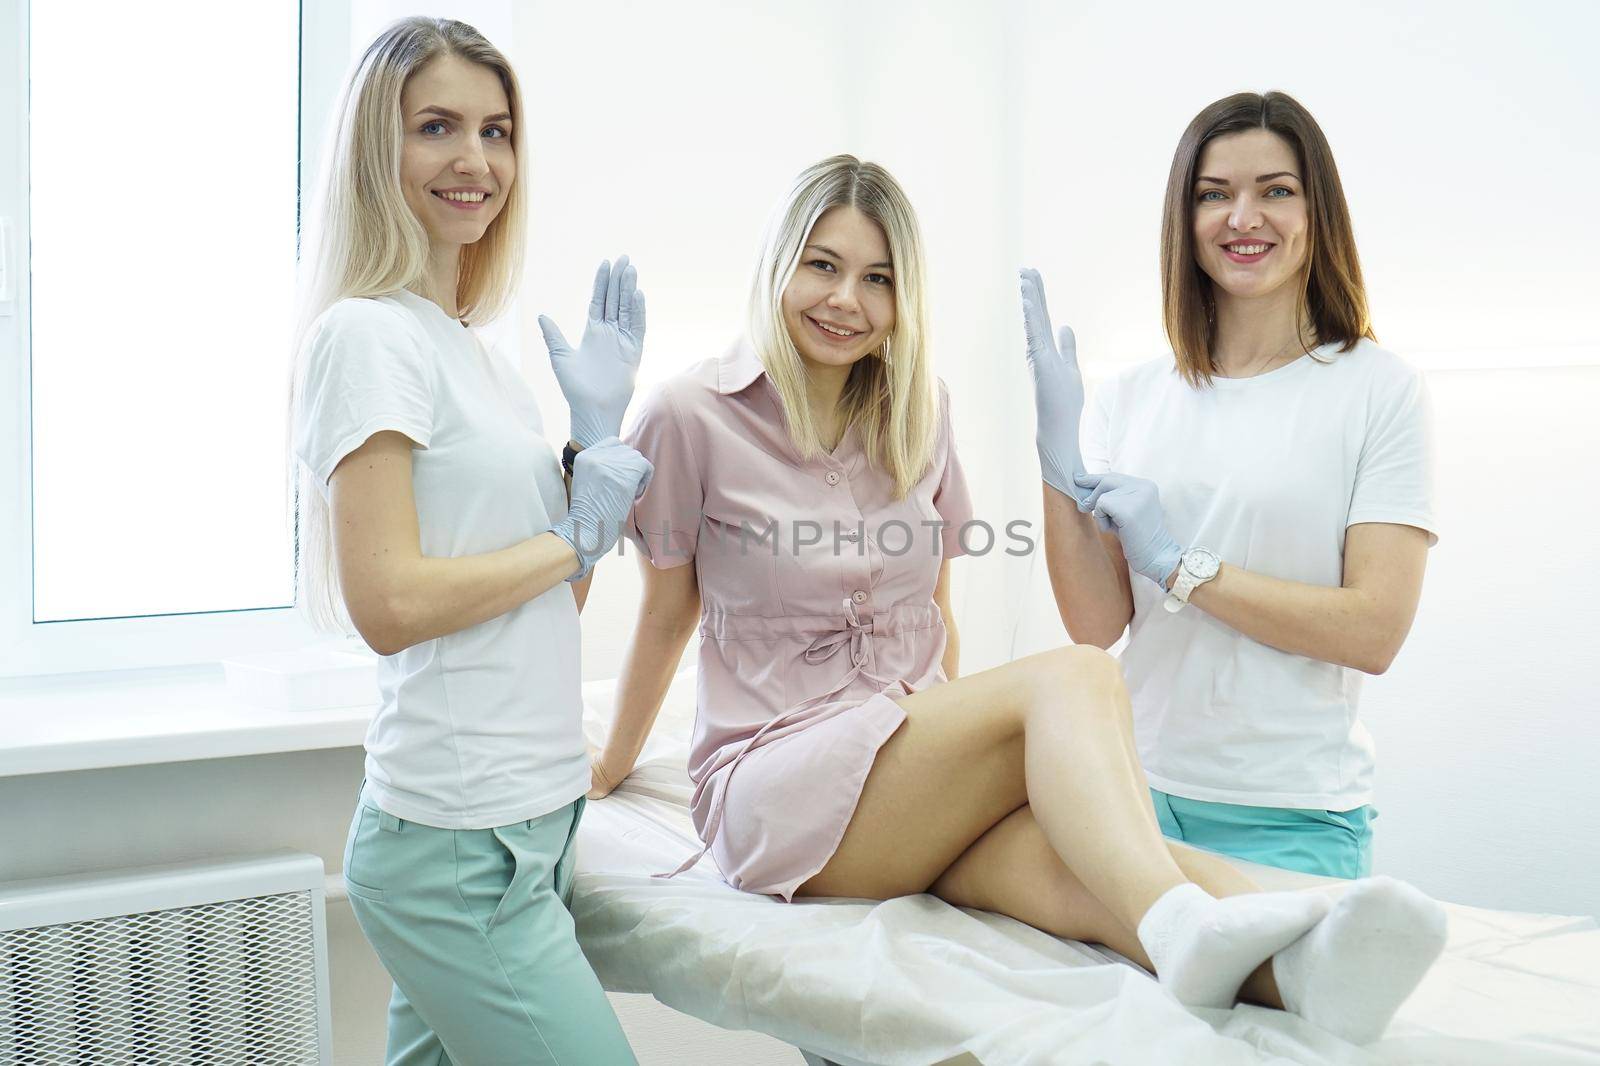 Two young beauticians or doctors put a glove on their hand and smile. The patient lies on the couch and smiles